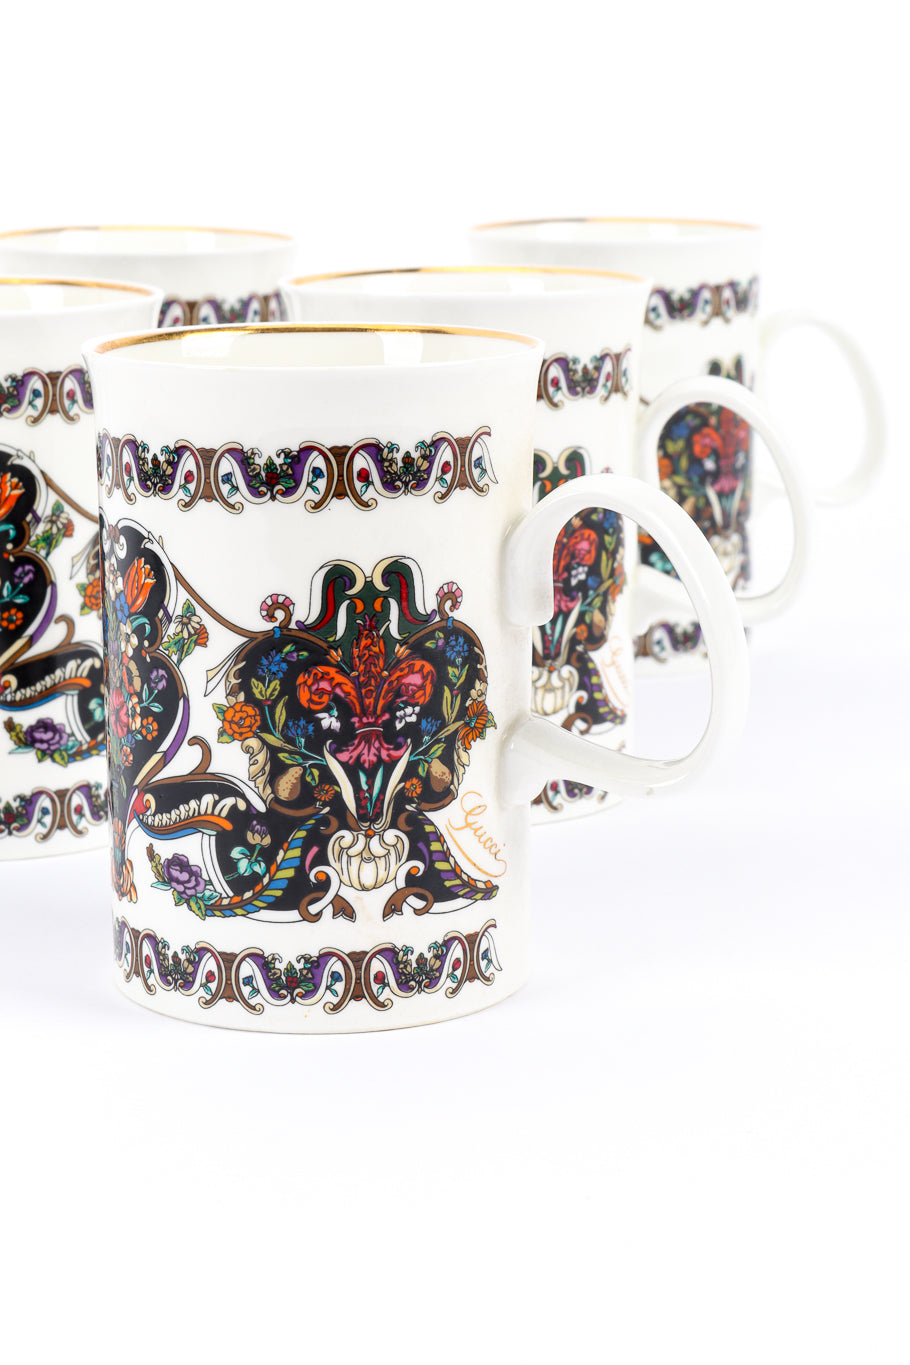 Gilded Floral Signed Mugs Boxed Set by Gucci handles in a row @recessla